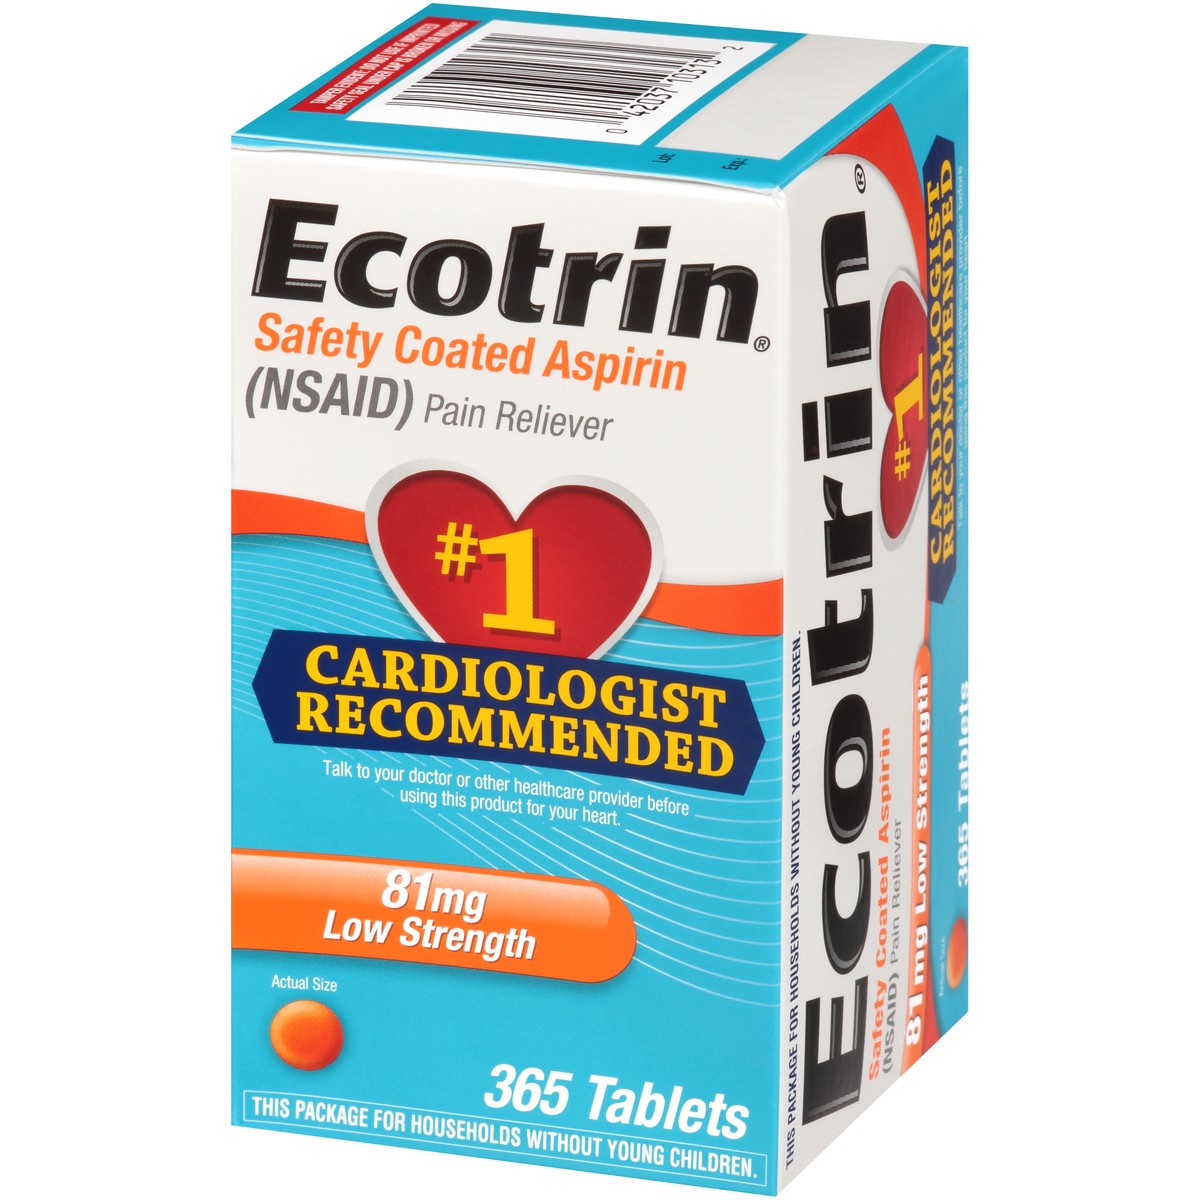 slide 2 of 10, Ecotrin Low Strength Safety Coated Aspirin, NSAID, 81mg, 365 Tablets, 365 pk